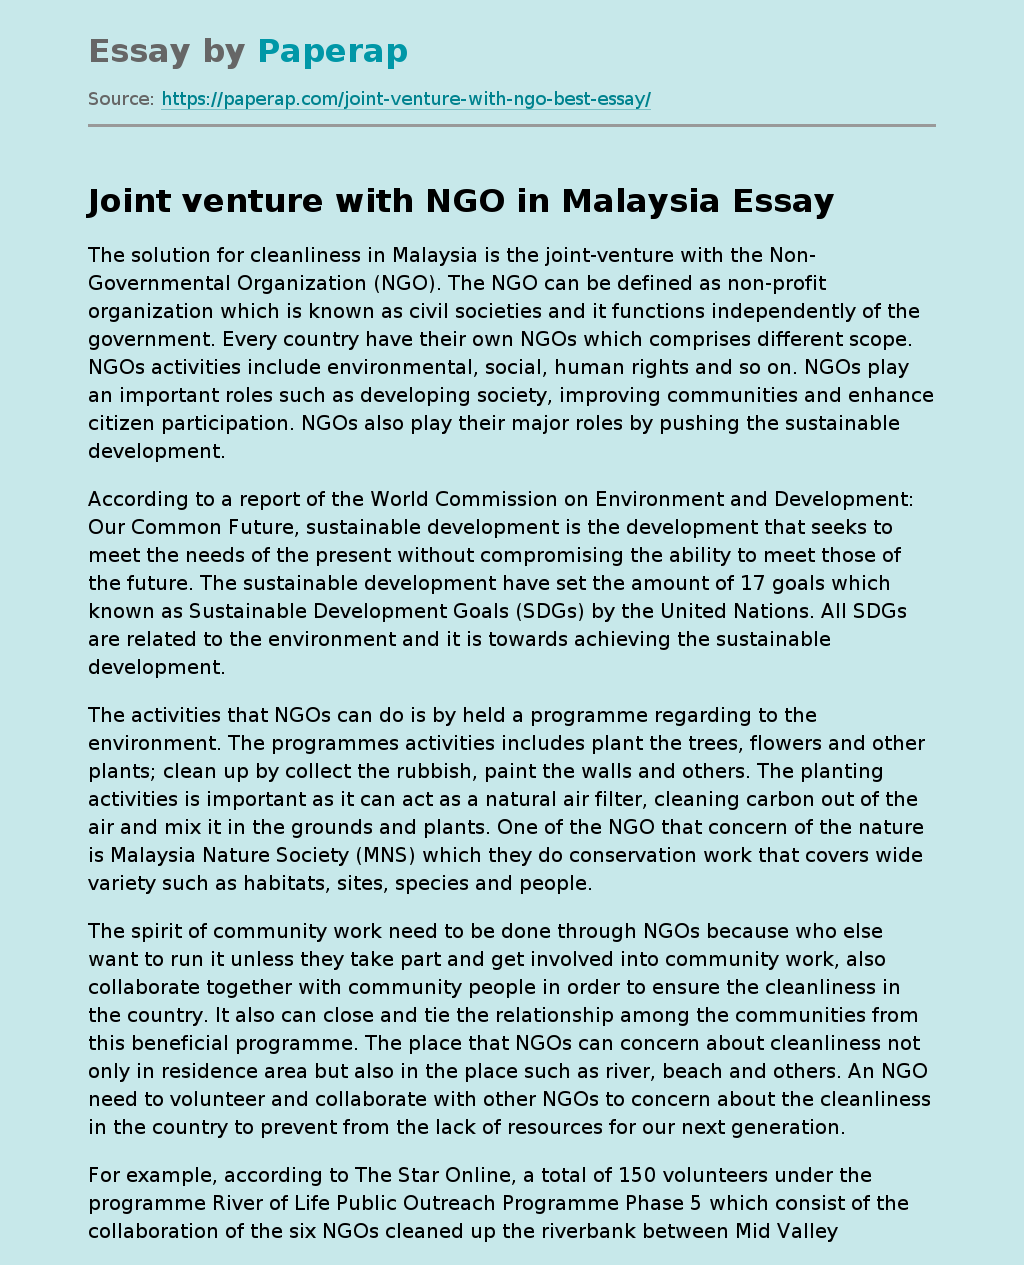 Joint venture with NGO in Malaysia